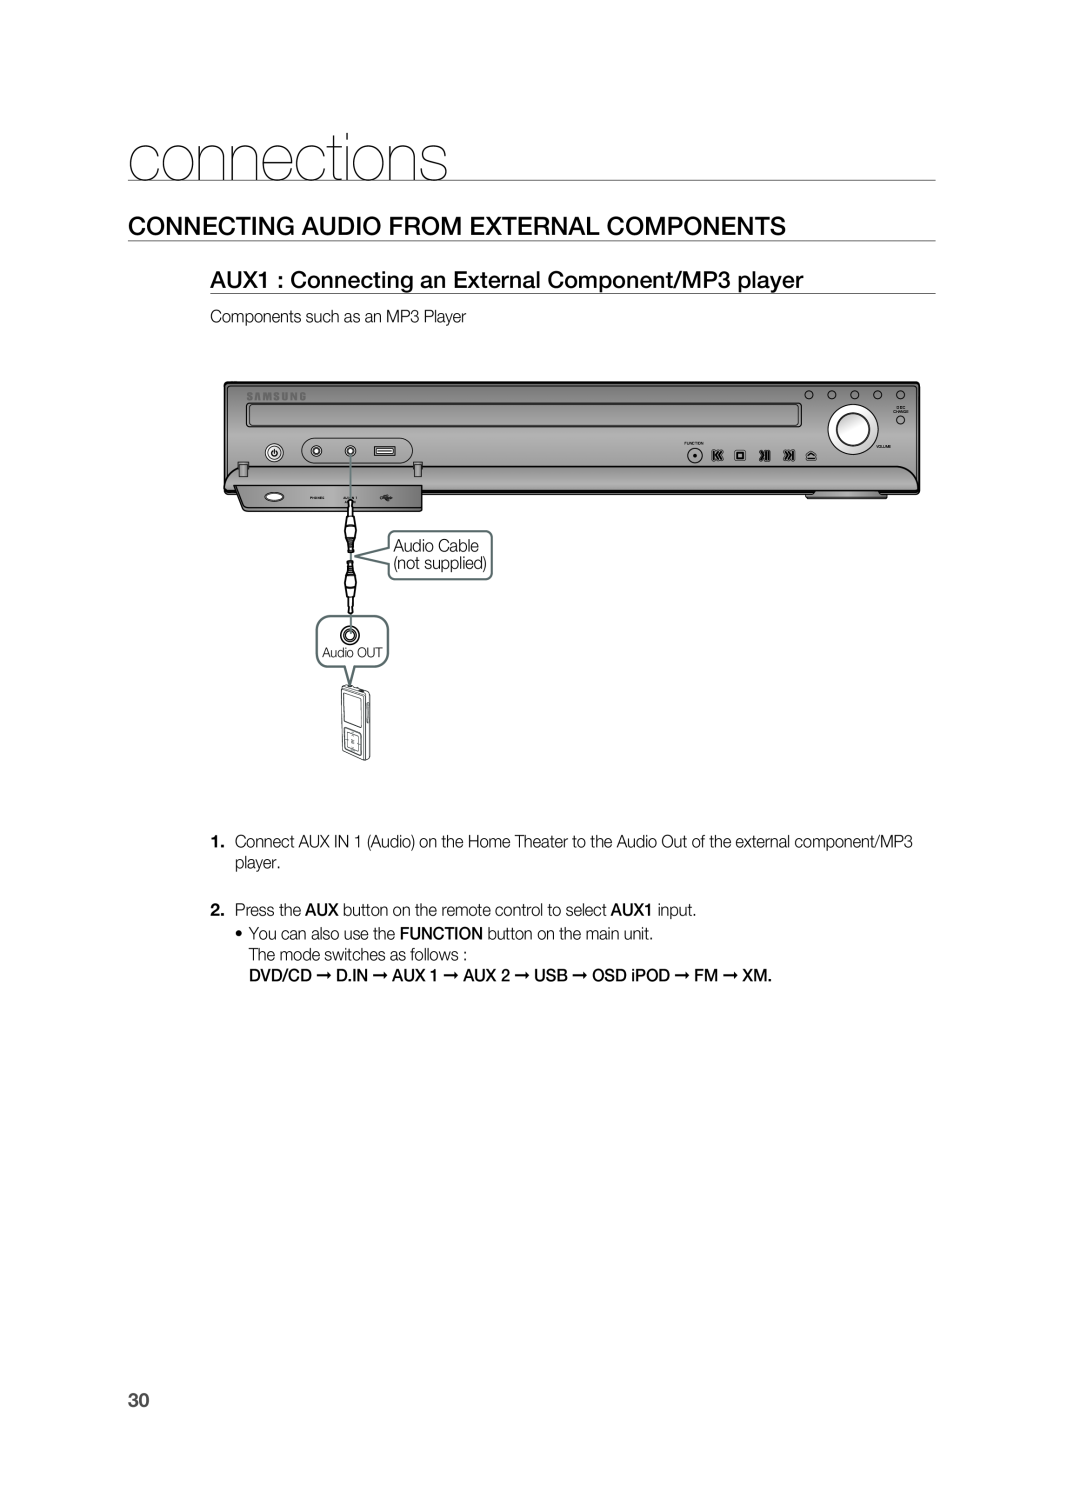 Samsung HT-Z510 manual Connecting Audio from External Components, connections 